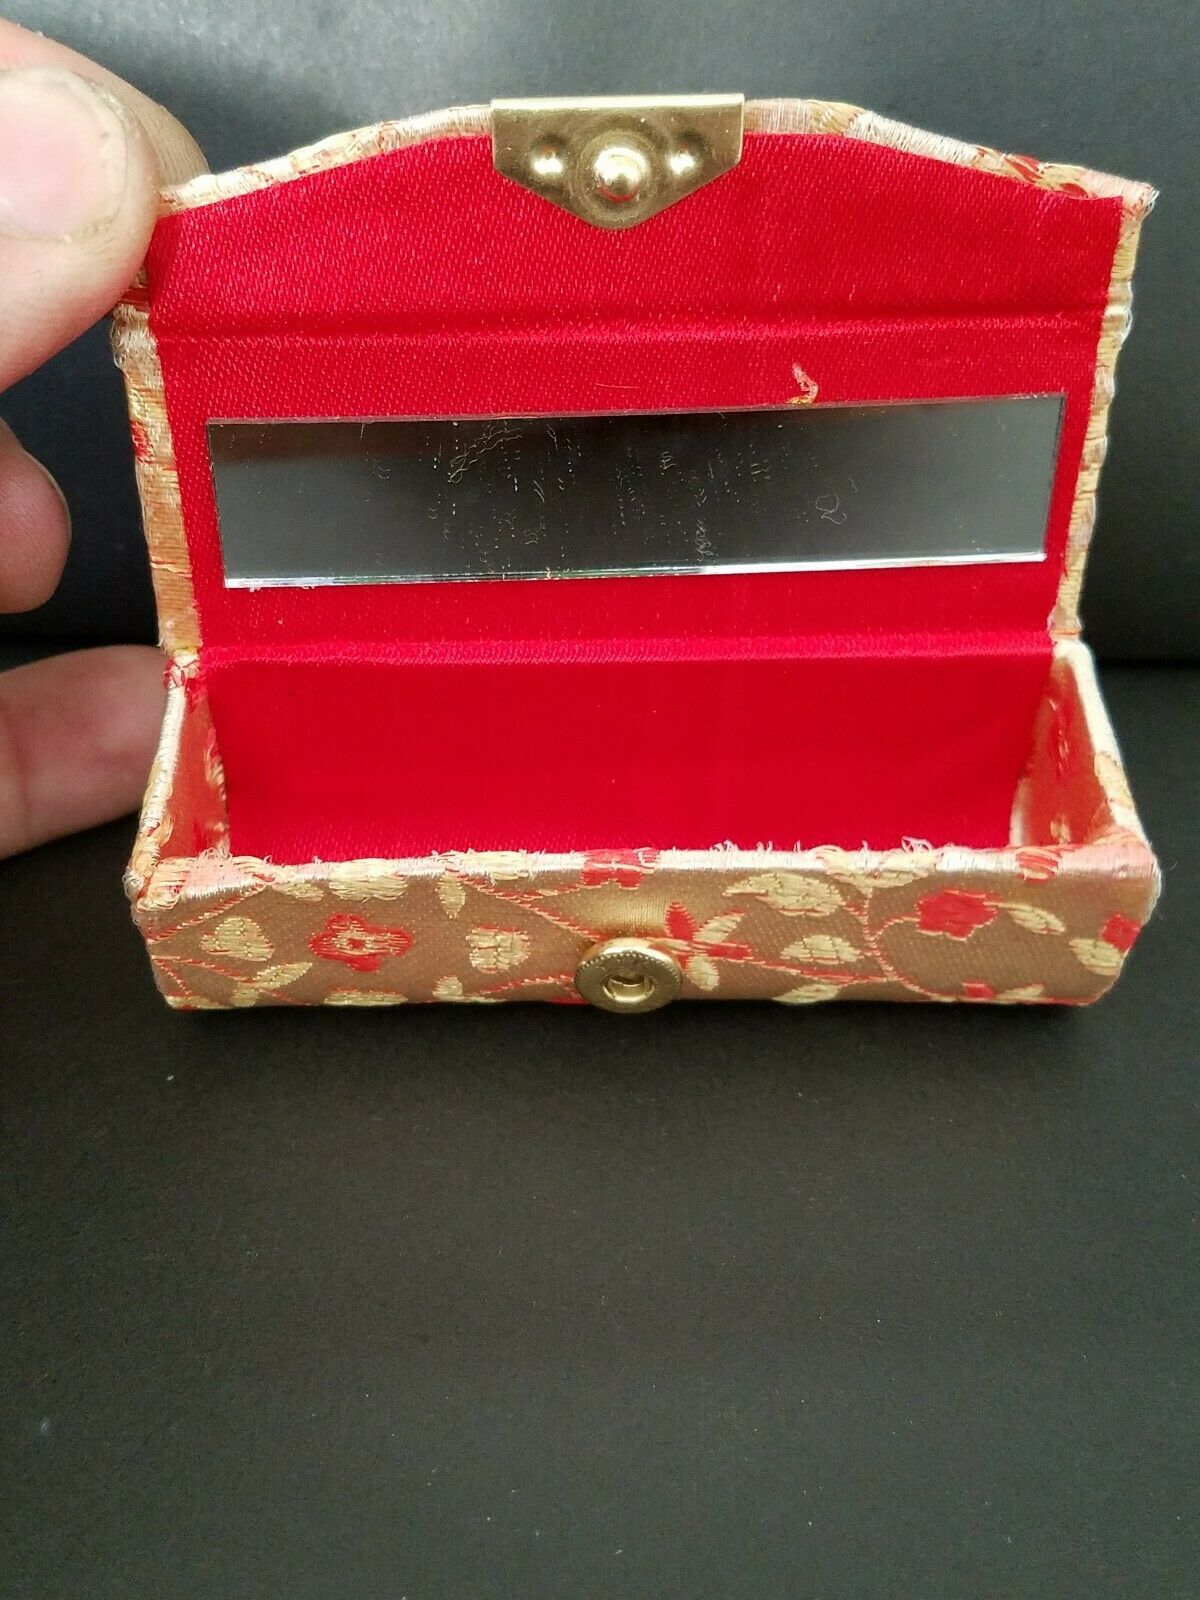 Vintage Lancome French Lipstick Holder Case With Mirror and 